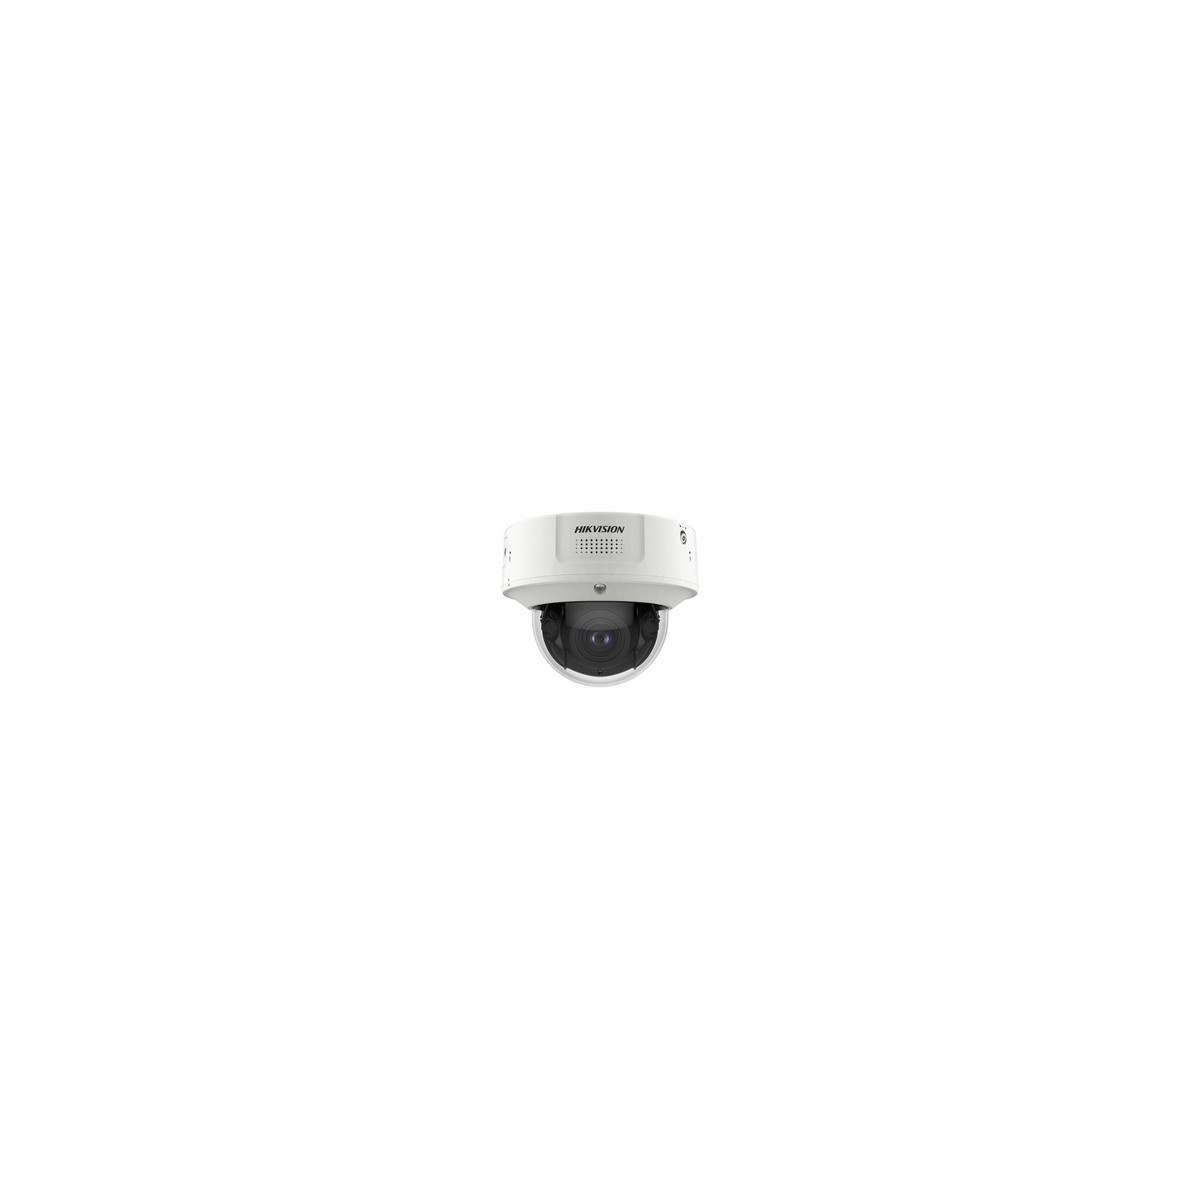 Hikvision Digital Technology IDS-2CD7186G0-IZHSY(2.8-12MM)(D) - IP security camera - Outdoor - Wired - Multi - 120 dB - FCC (47 